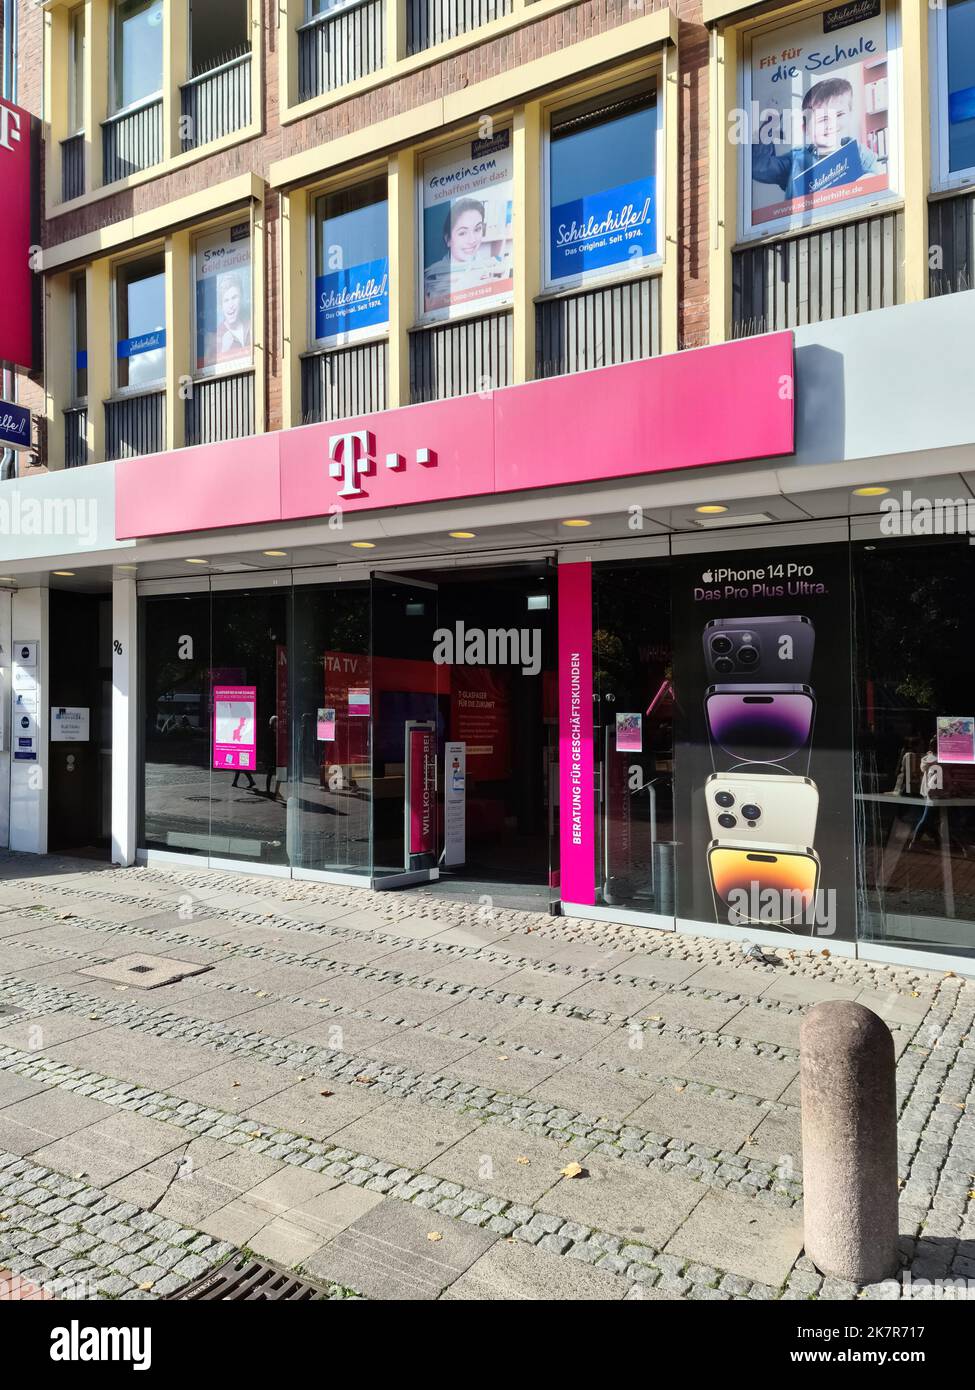 Kiel, Germany - 16. October 2022: The logo of the largest German telecommunication company named Telekom at a store Stock Photo